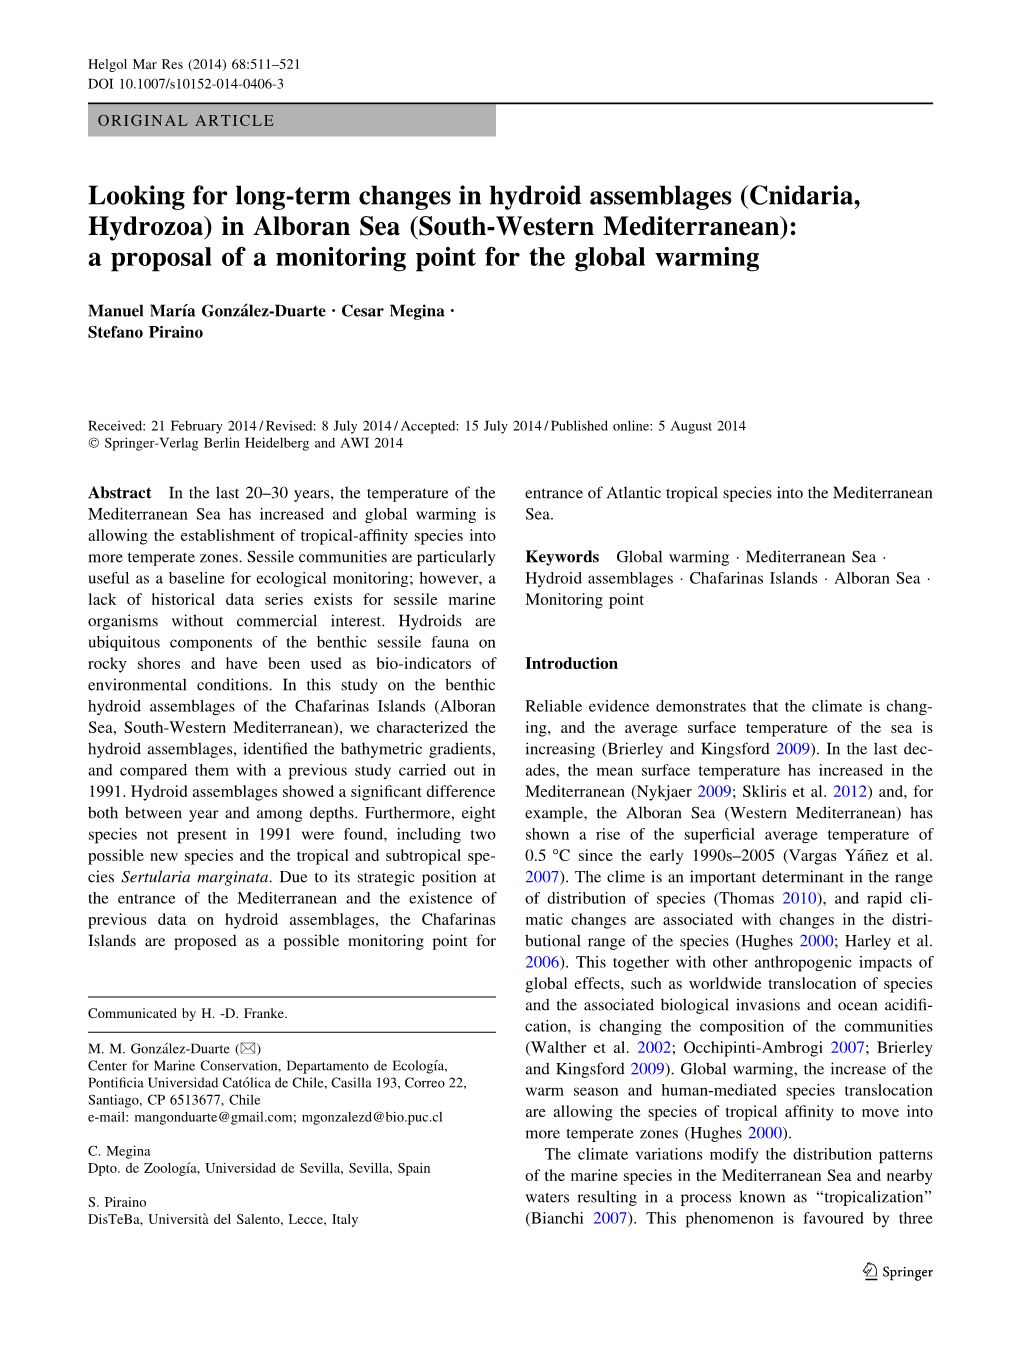 (Cnidaria, Hydrozoa) in Alboran Sea (South-Western Mediterranean): a Proposal of a Monitoring Point for the Global Warming